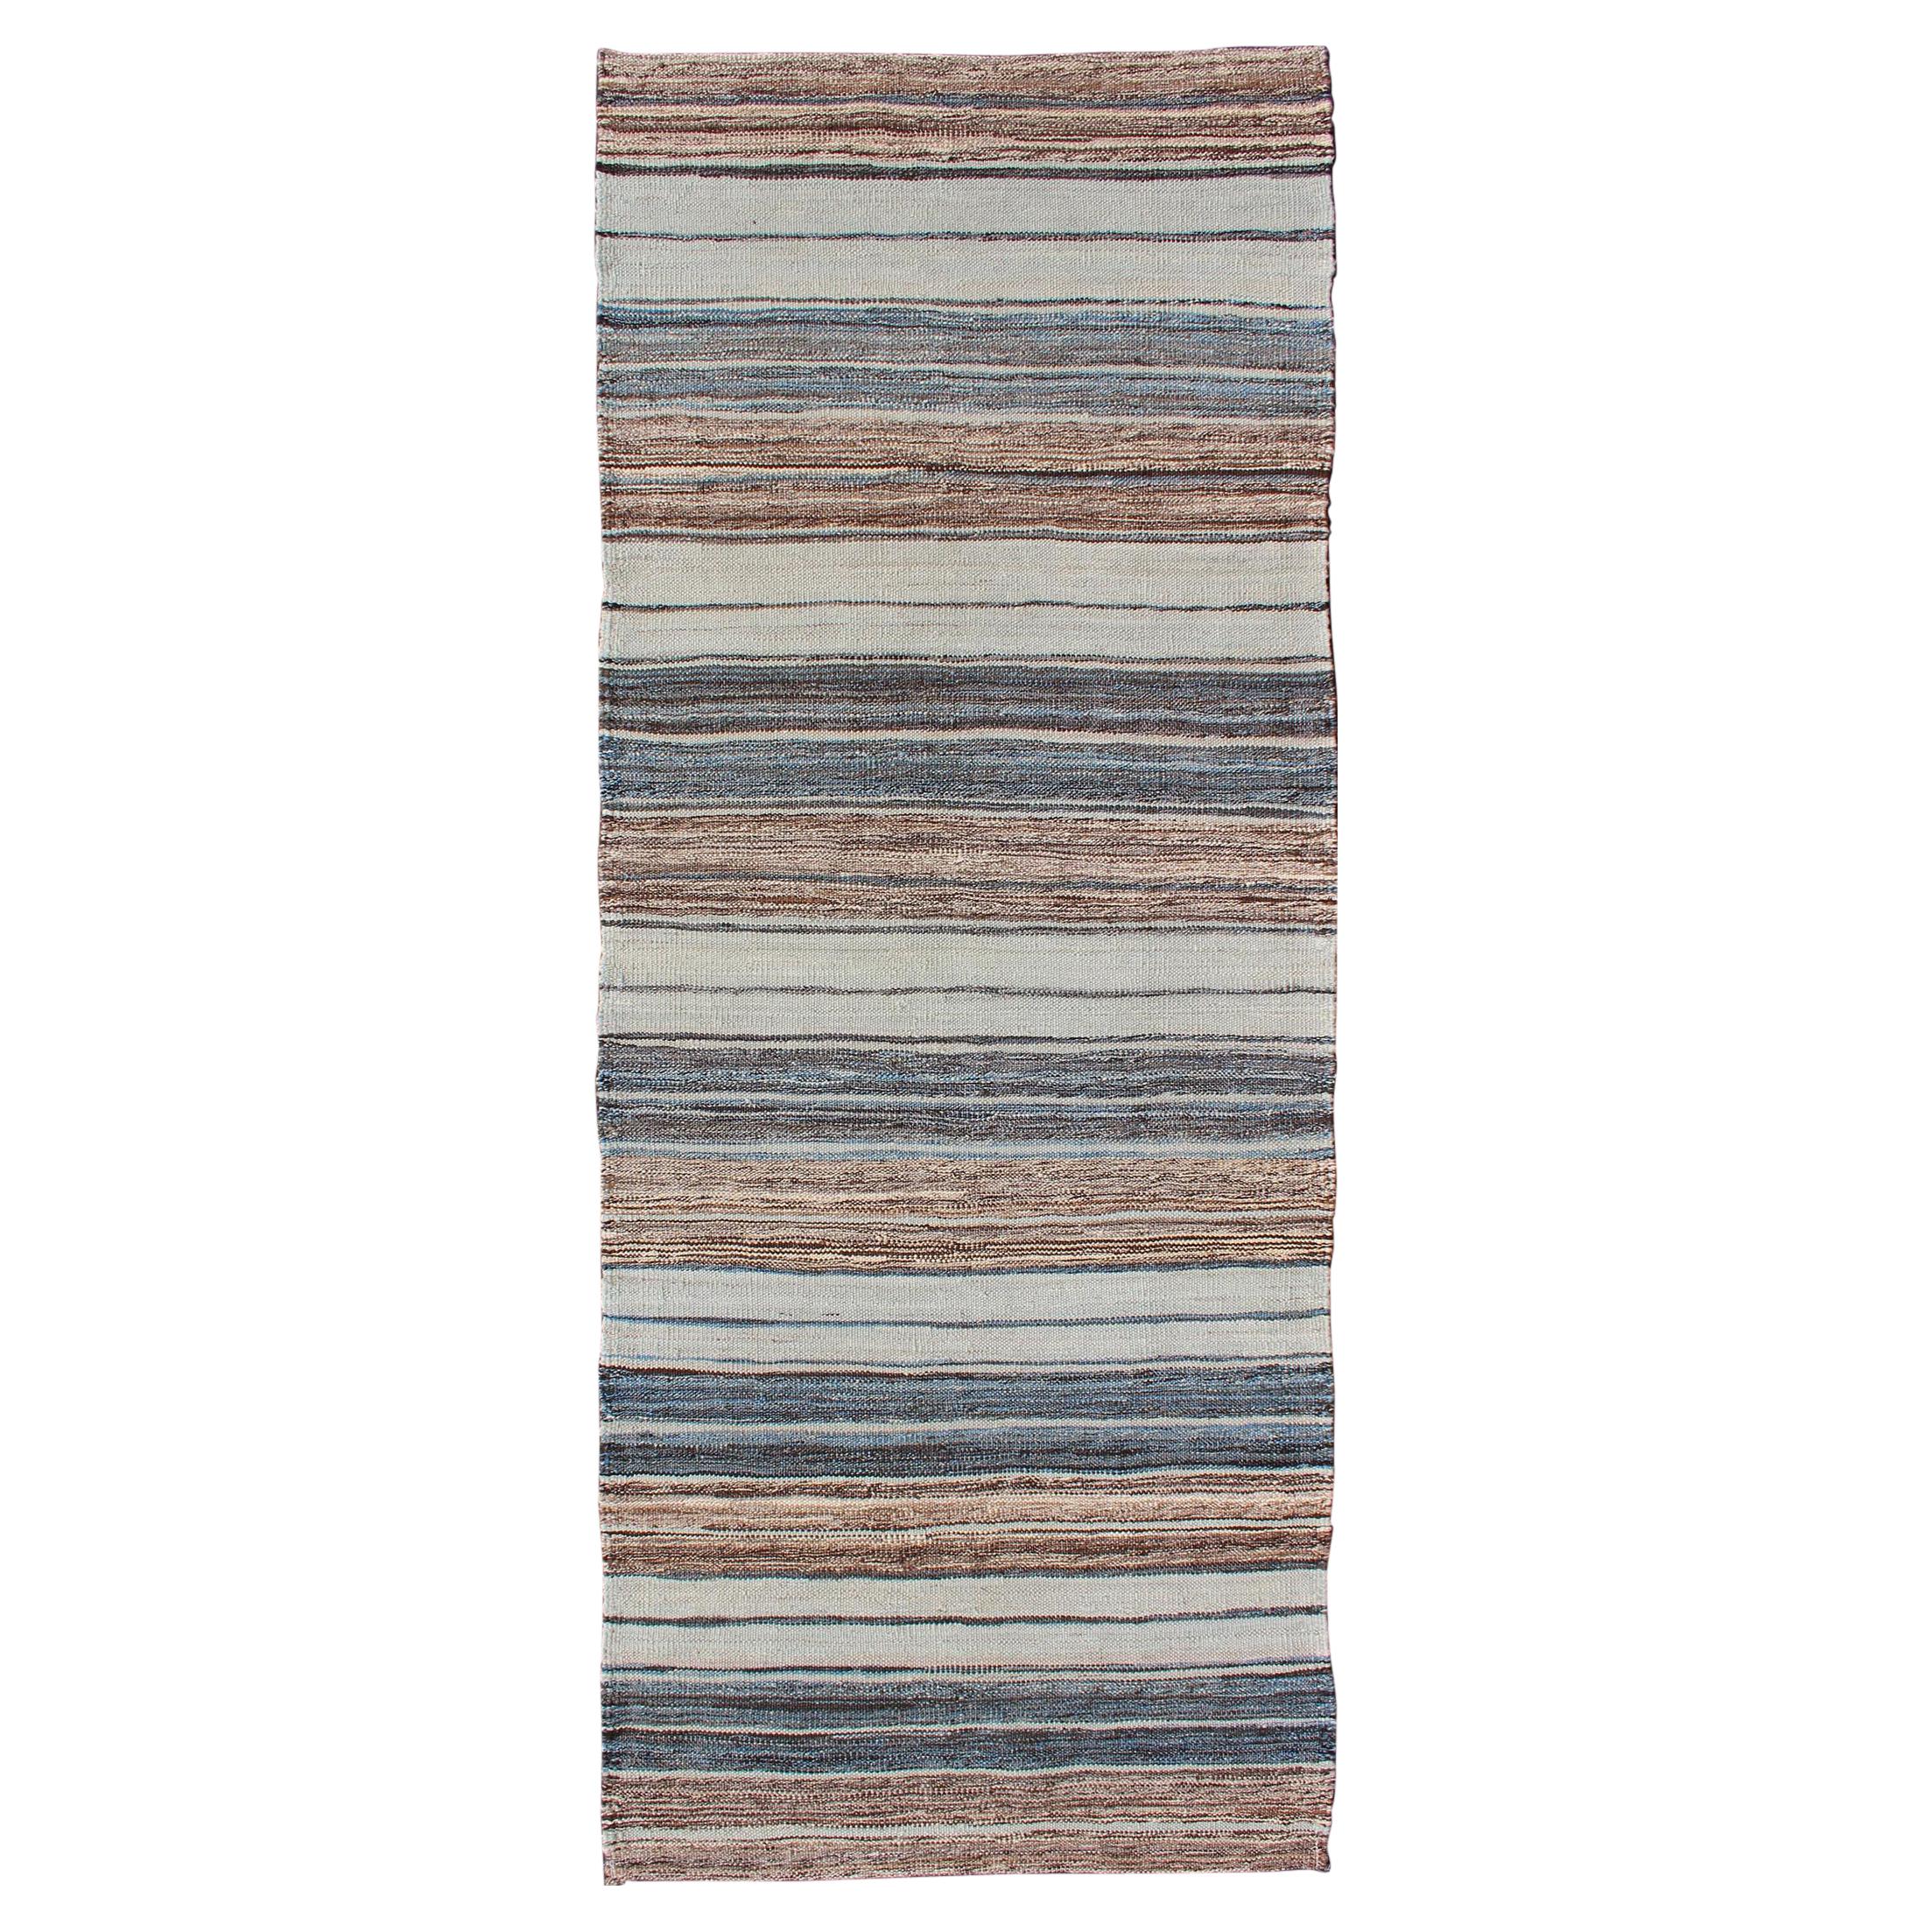 Modern Kilim Rug with Stripes in Shades of Blue, Taupe, Brown, and Cream Runner For Sale